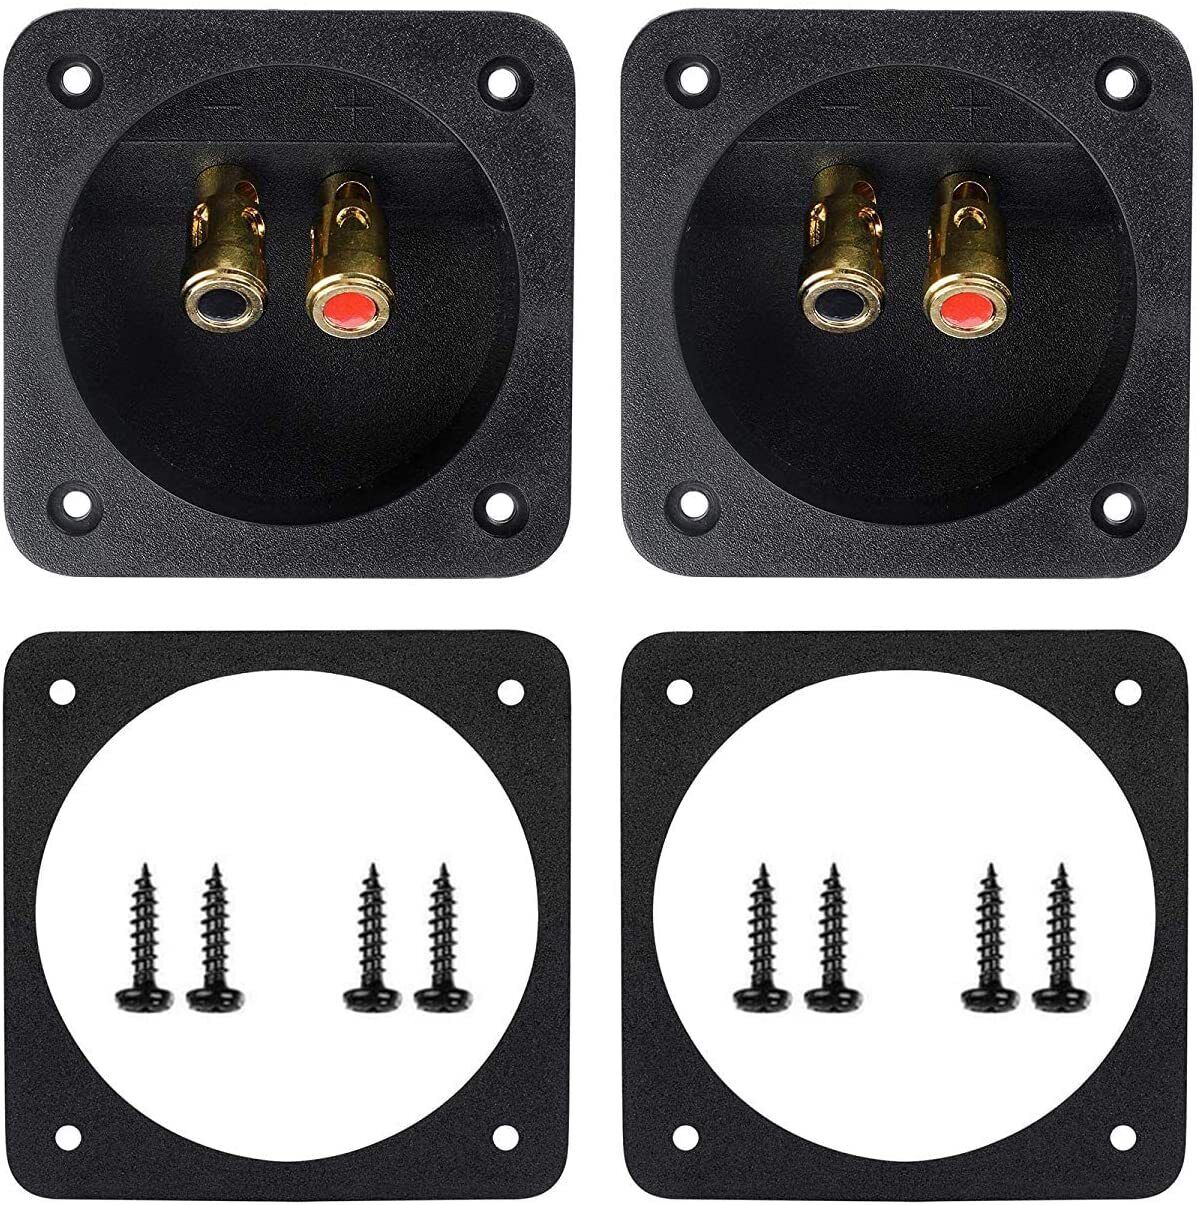 2 PACK SPEAKER BOX TERMINAL SQUARE TWIST CUP CONNECTOR SUBWOOFER ENCLOSURE WIRE Unbranded TC5MC X 2